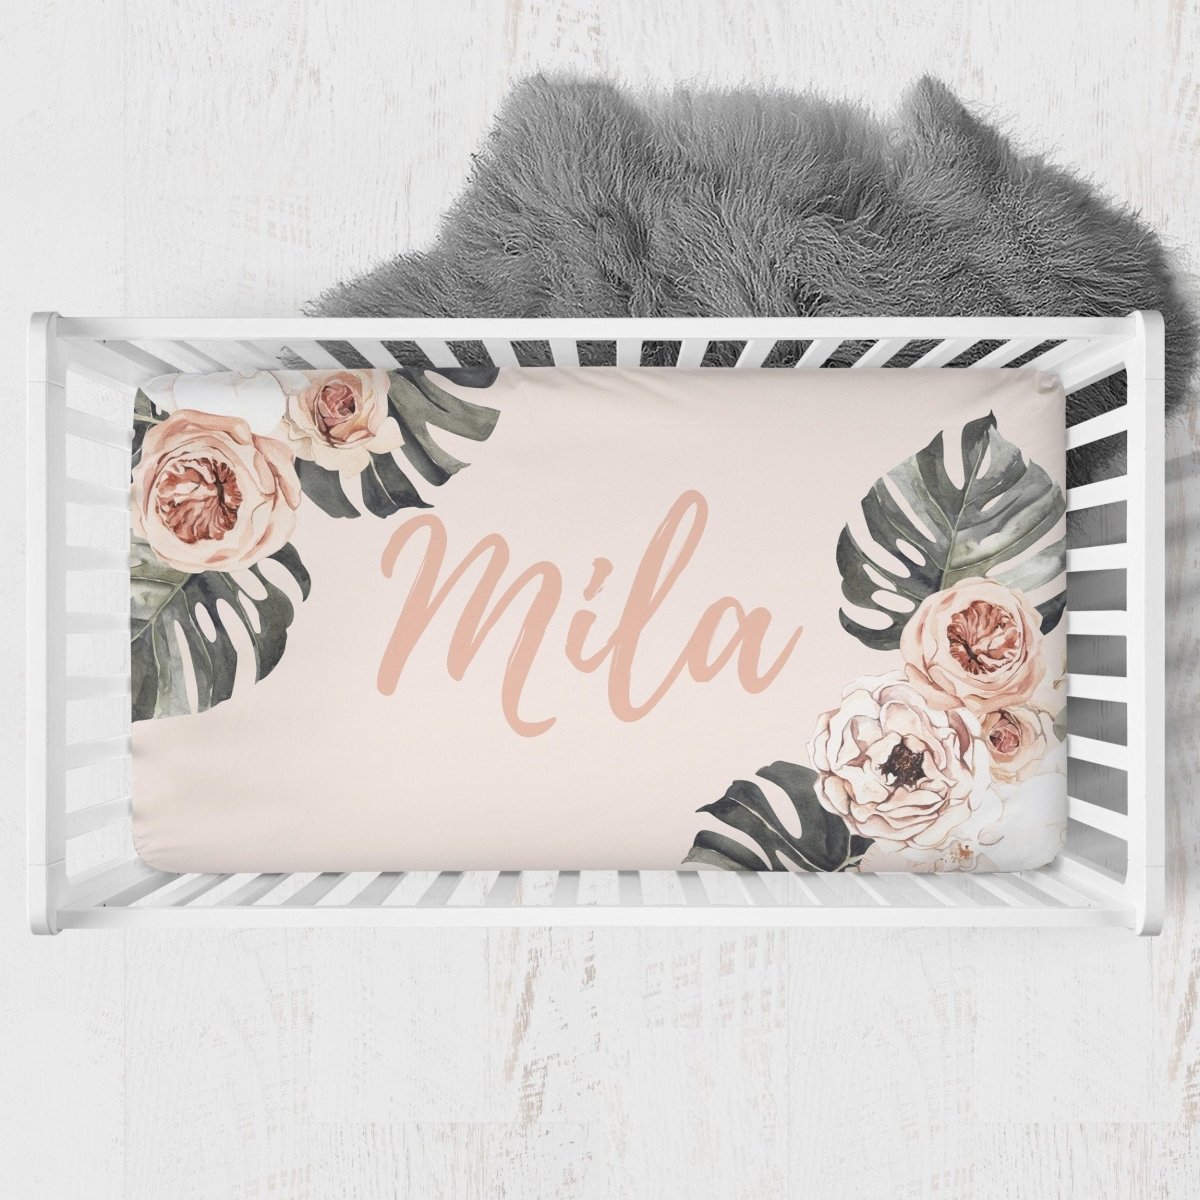 Boho Tropics Personalized Crib Sheet - gender_girl, Personalized_Yes, text